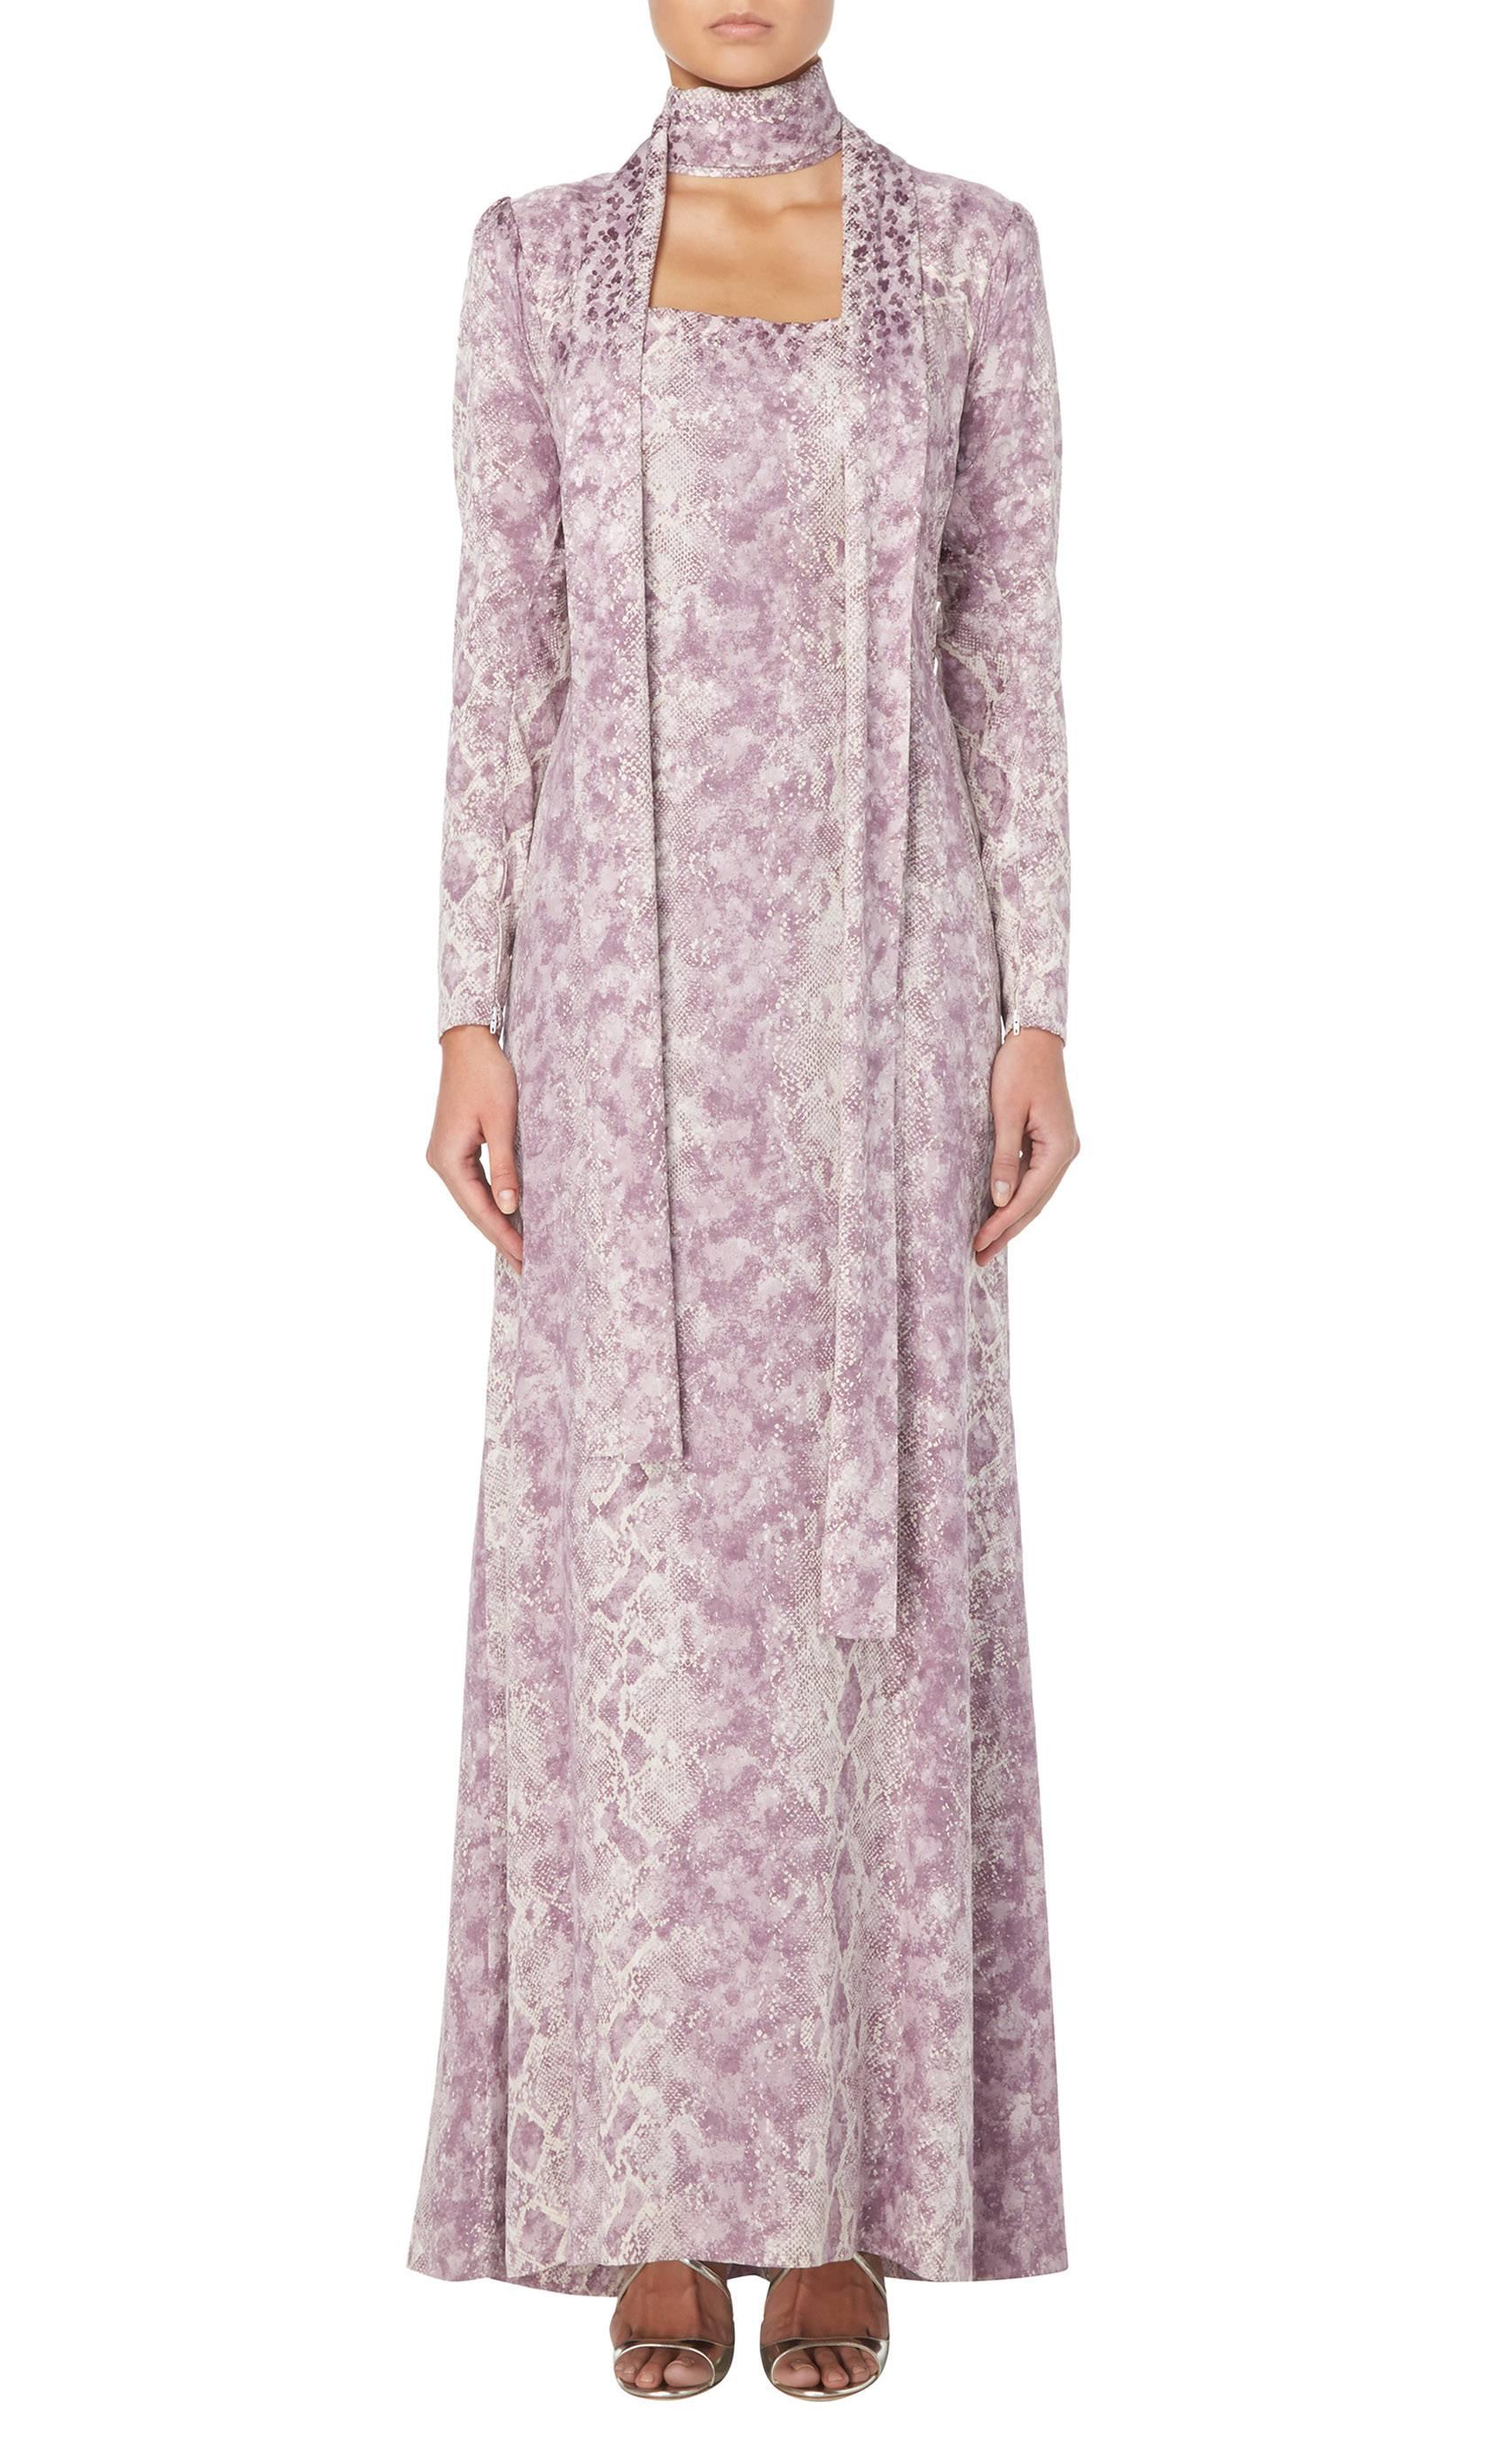 A beautiful and dramatic piece of haute couture by the great Yves Saint Laurent, this exceptional dress is made of pure silk, printed with a python skin pattern in lilac upon a rich ivory background. Gently shaped and darted at the waist to enhance